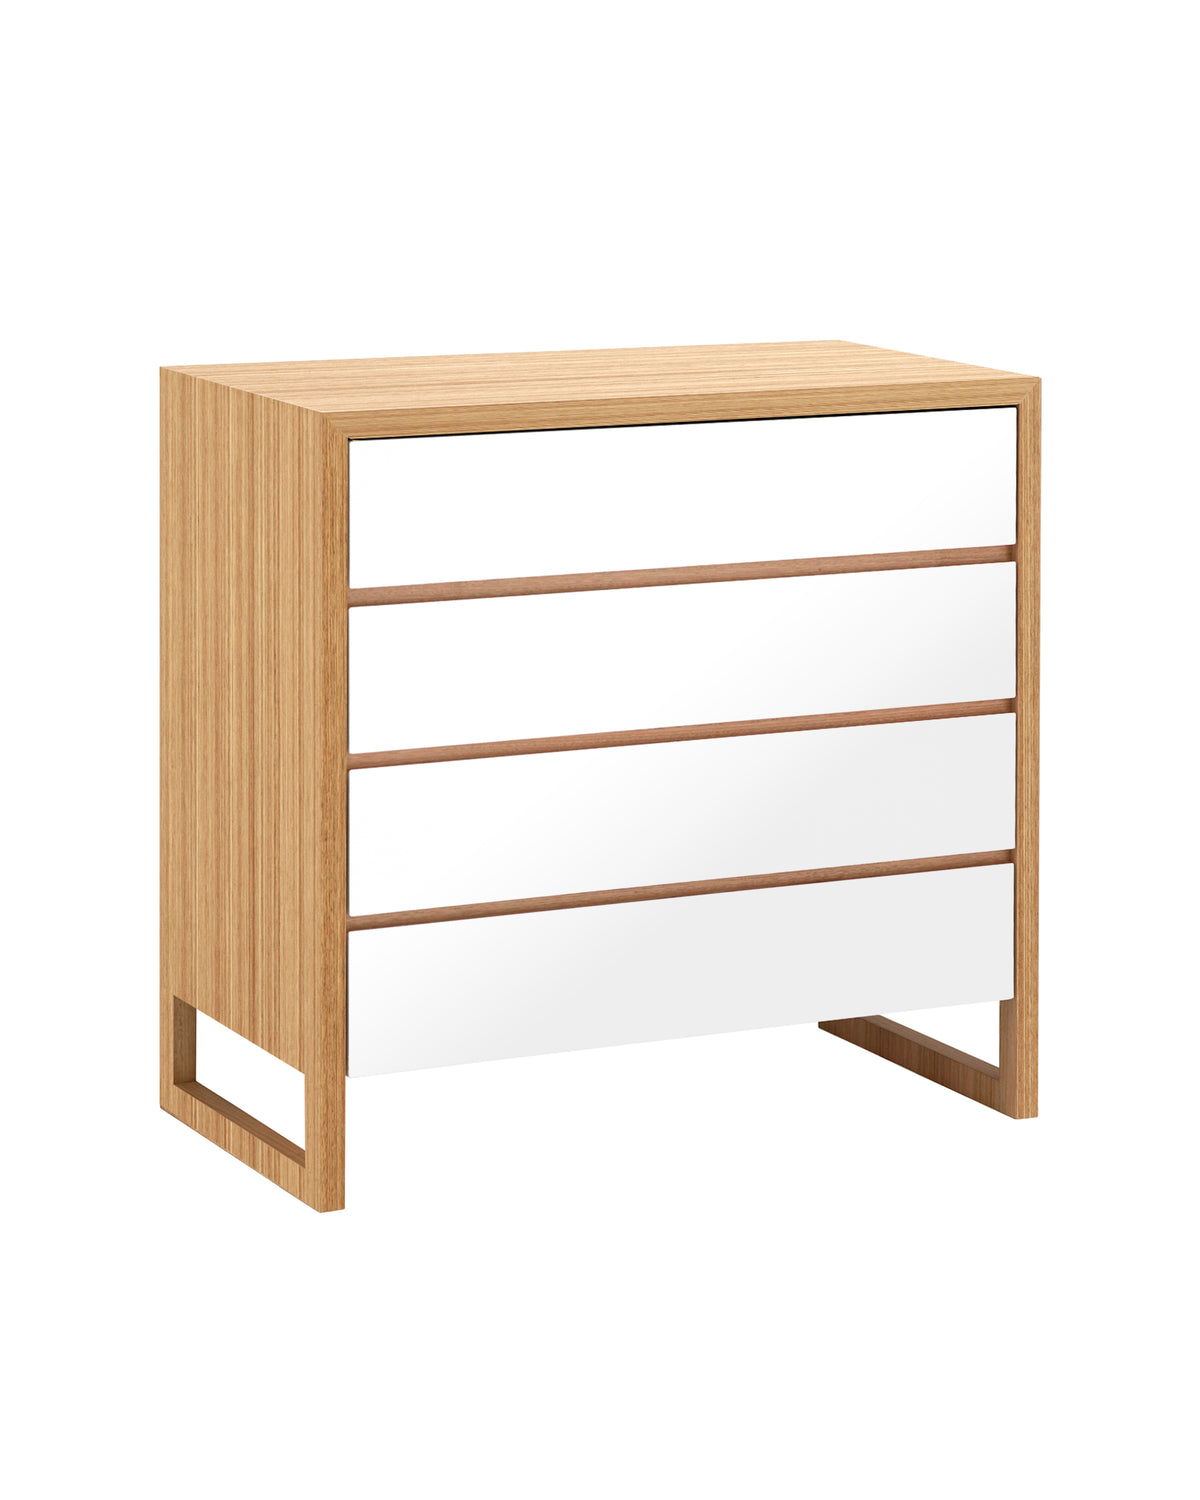 Colour Box Chest of Drawers features a timber frame which encases itself around five painted drawers. Concealing intricate mitred joinery with legs that flow into a continuous wrap, to create classic simplicity.